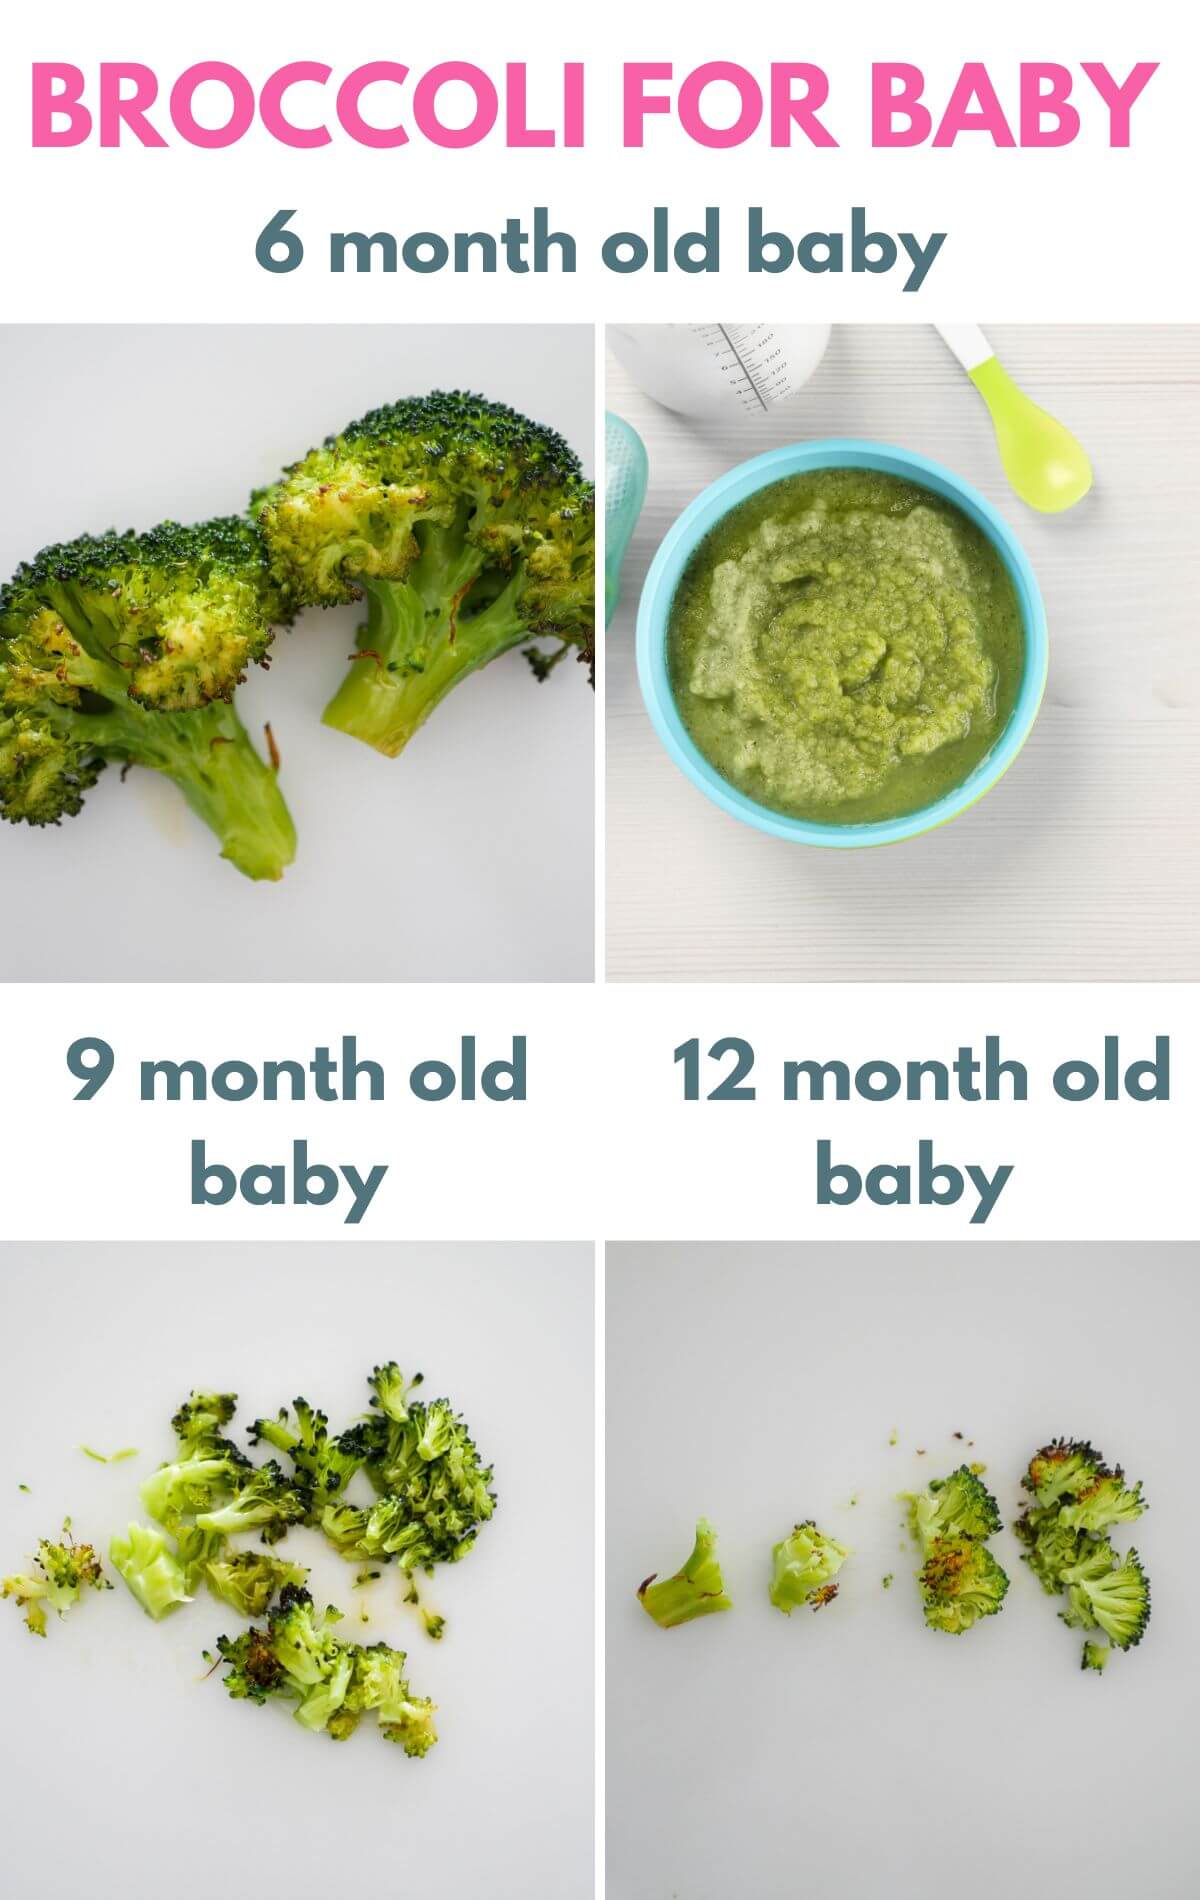 title with 4 images showing different ways of serving broccoli for baby food